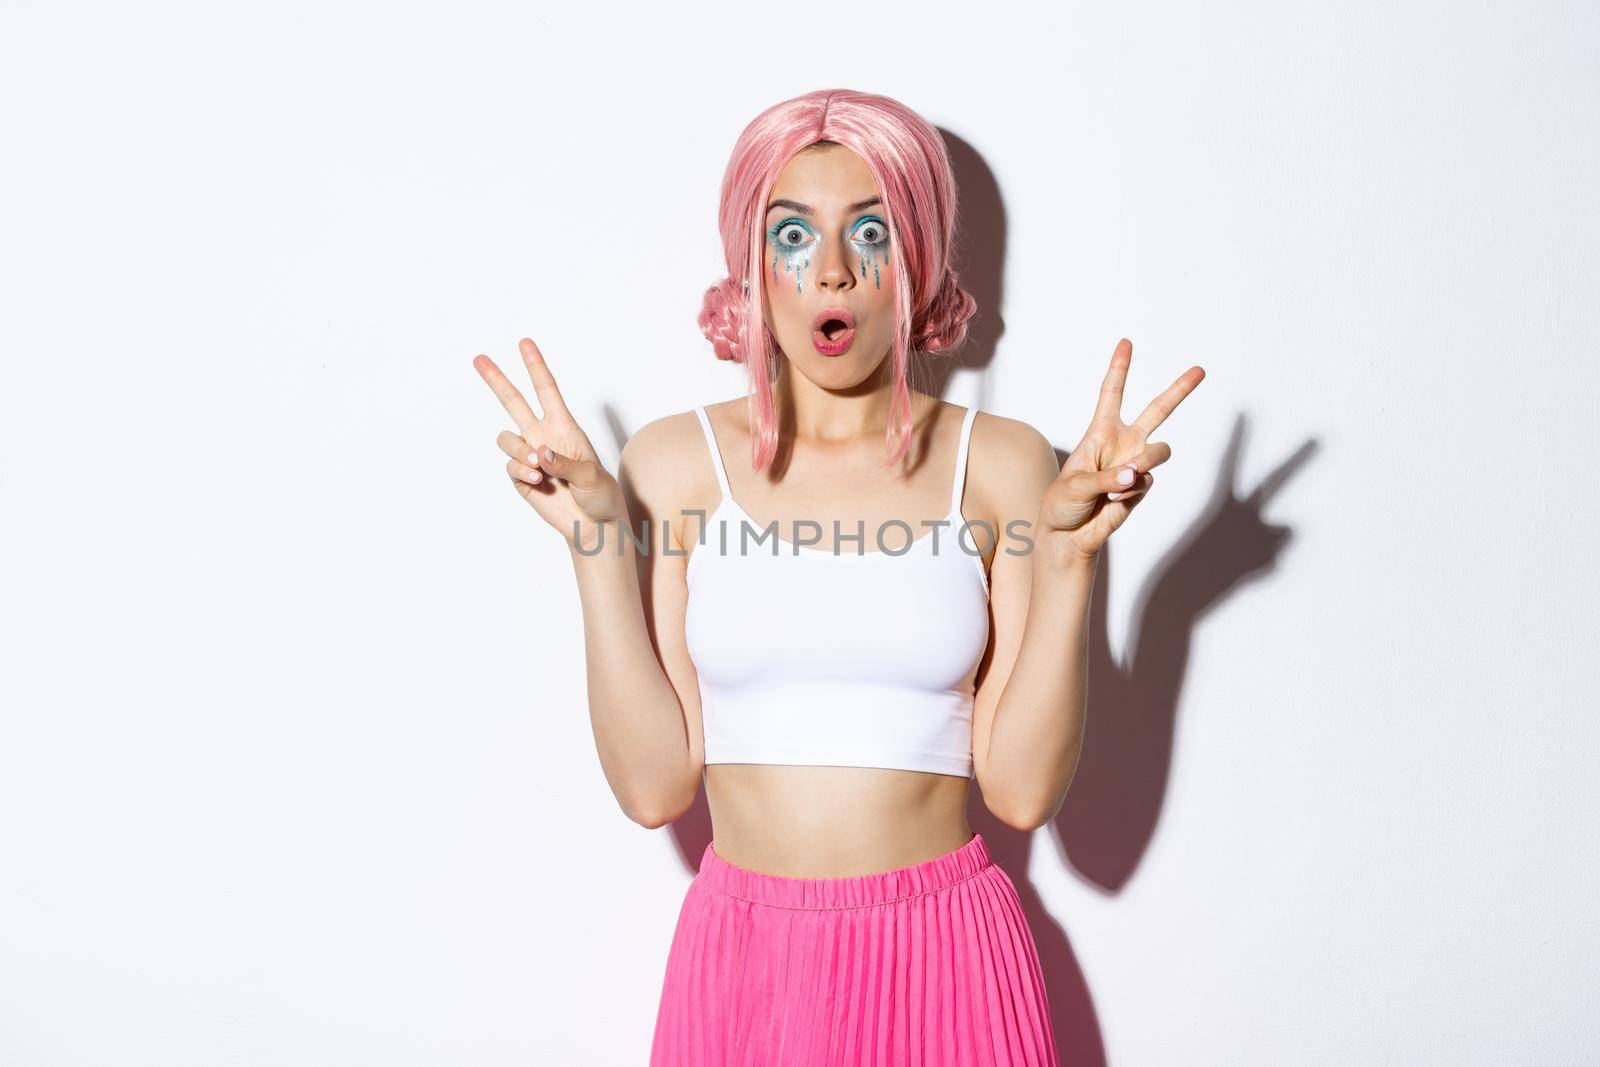 Portrait of amazed gasping girl looking at something fantastic, showing peace signs, wearing halloween costume for party, holiday celebration, standing over white background.